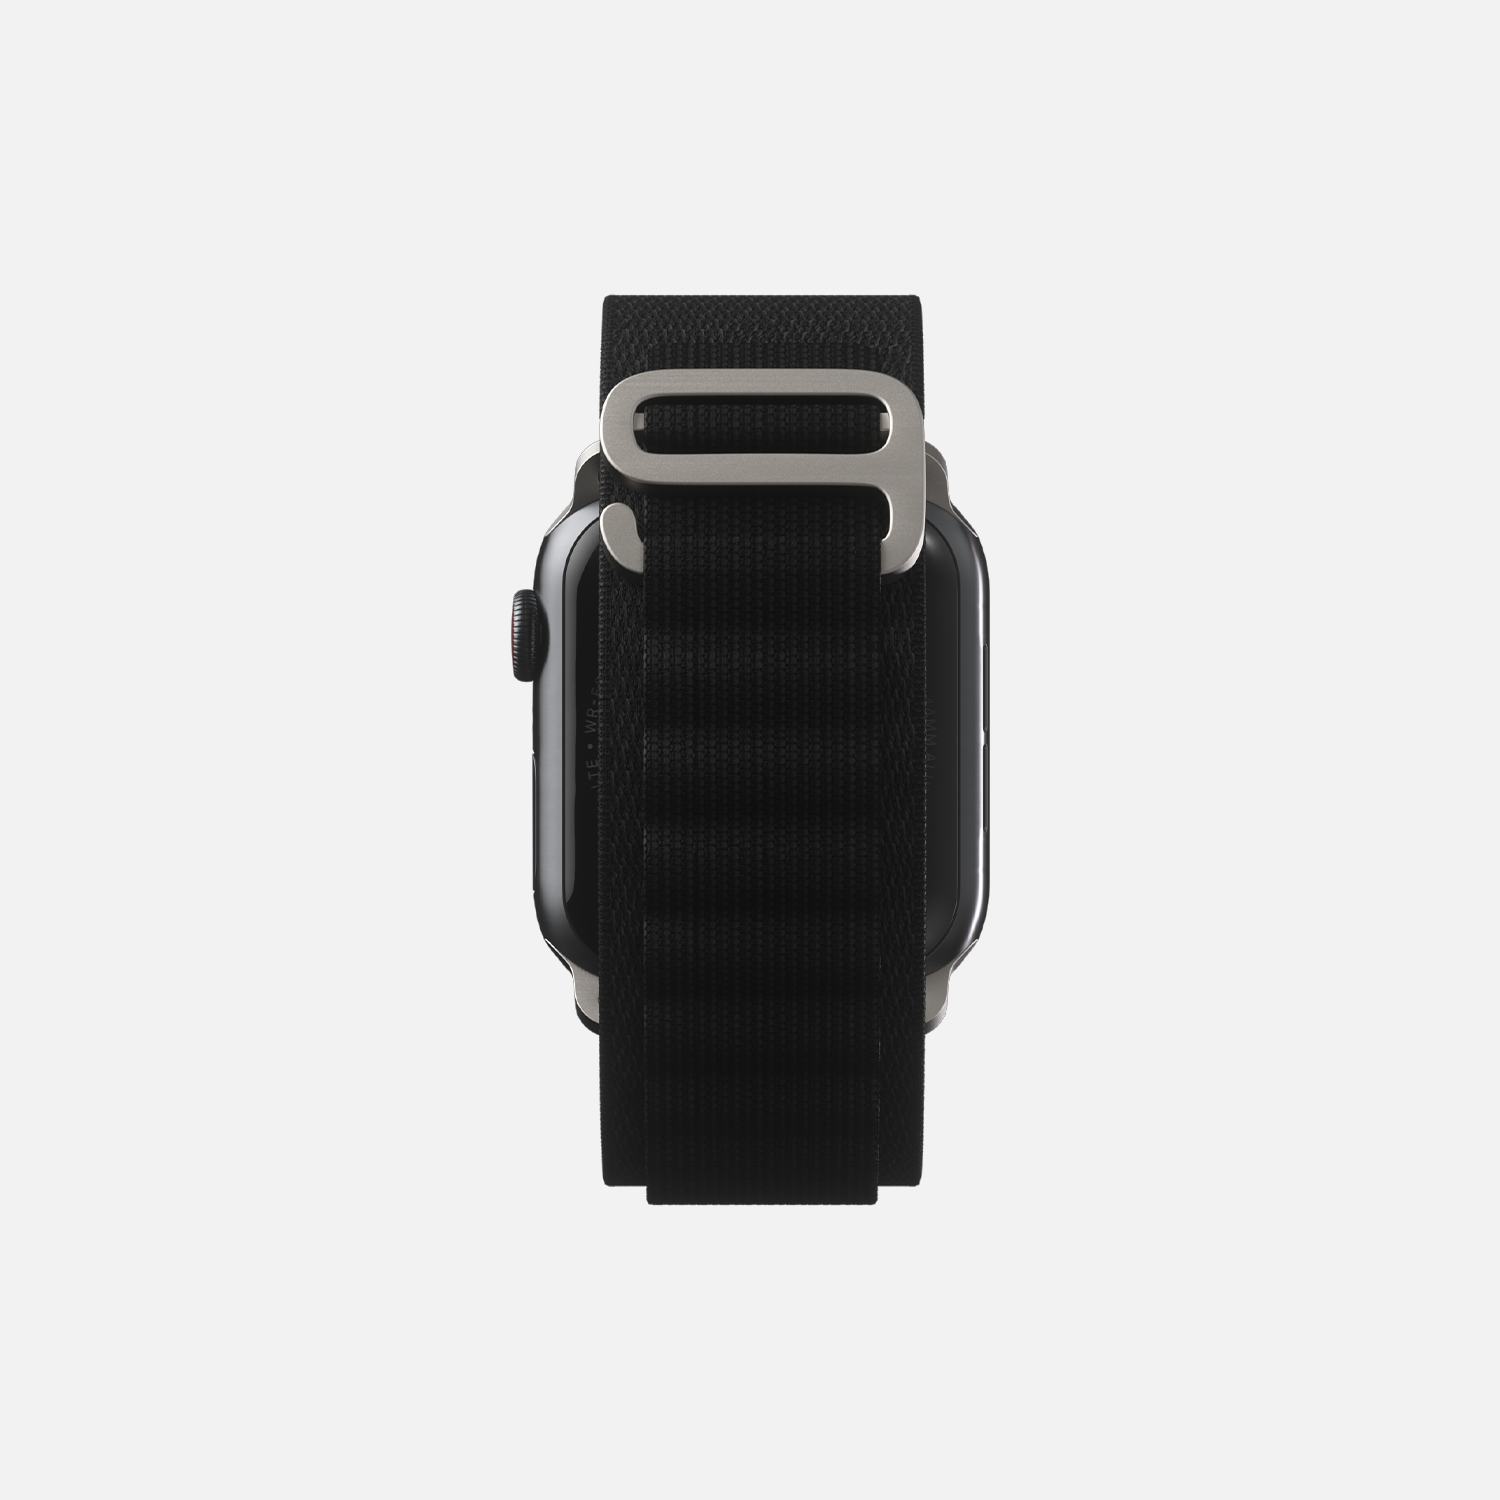 Rear view of a black smartwatch with fabric strap isolated on a white background.